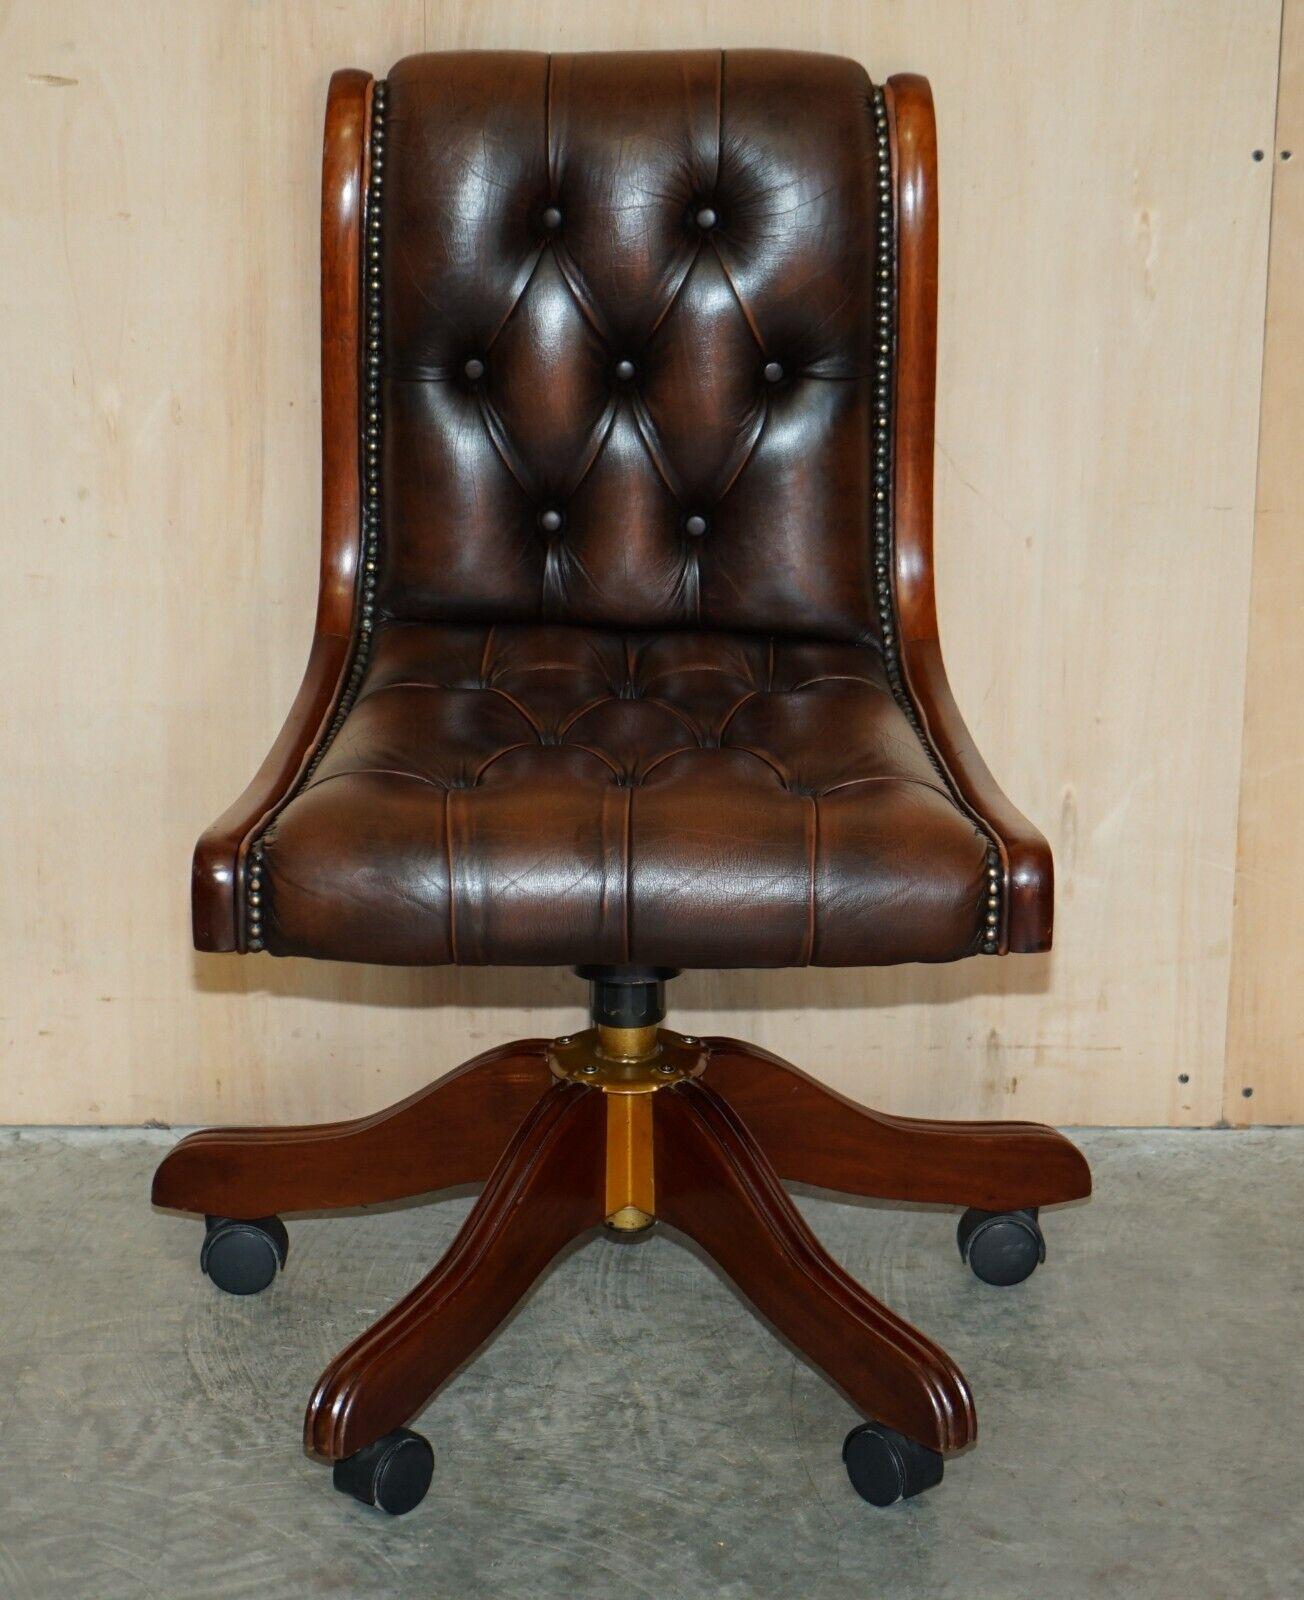 Here we have for sale a lovely vintage leather and mahogany framed Chesterfield desk chair.

This stunning chair is the perfect size for knee hole desks as slightly smaller than regular desk chairs.

As you can see from the photographs it is in